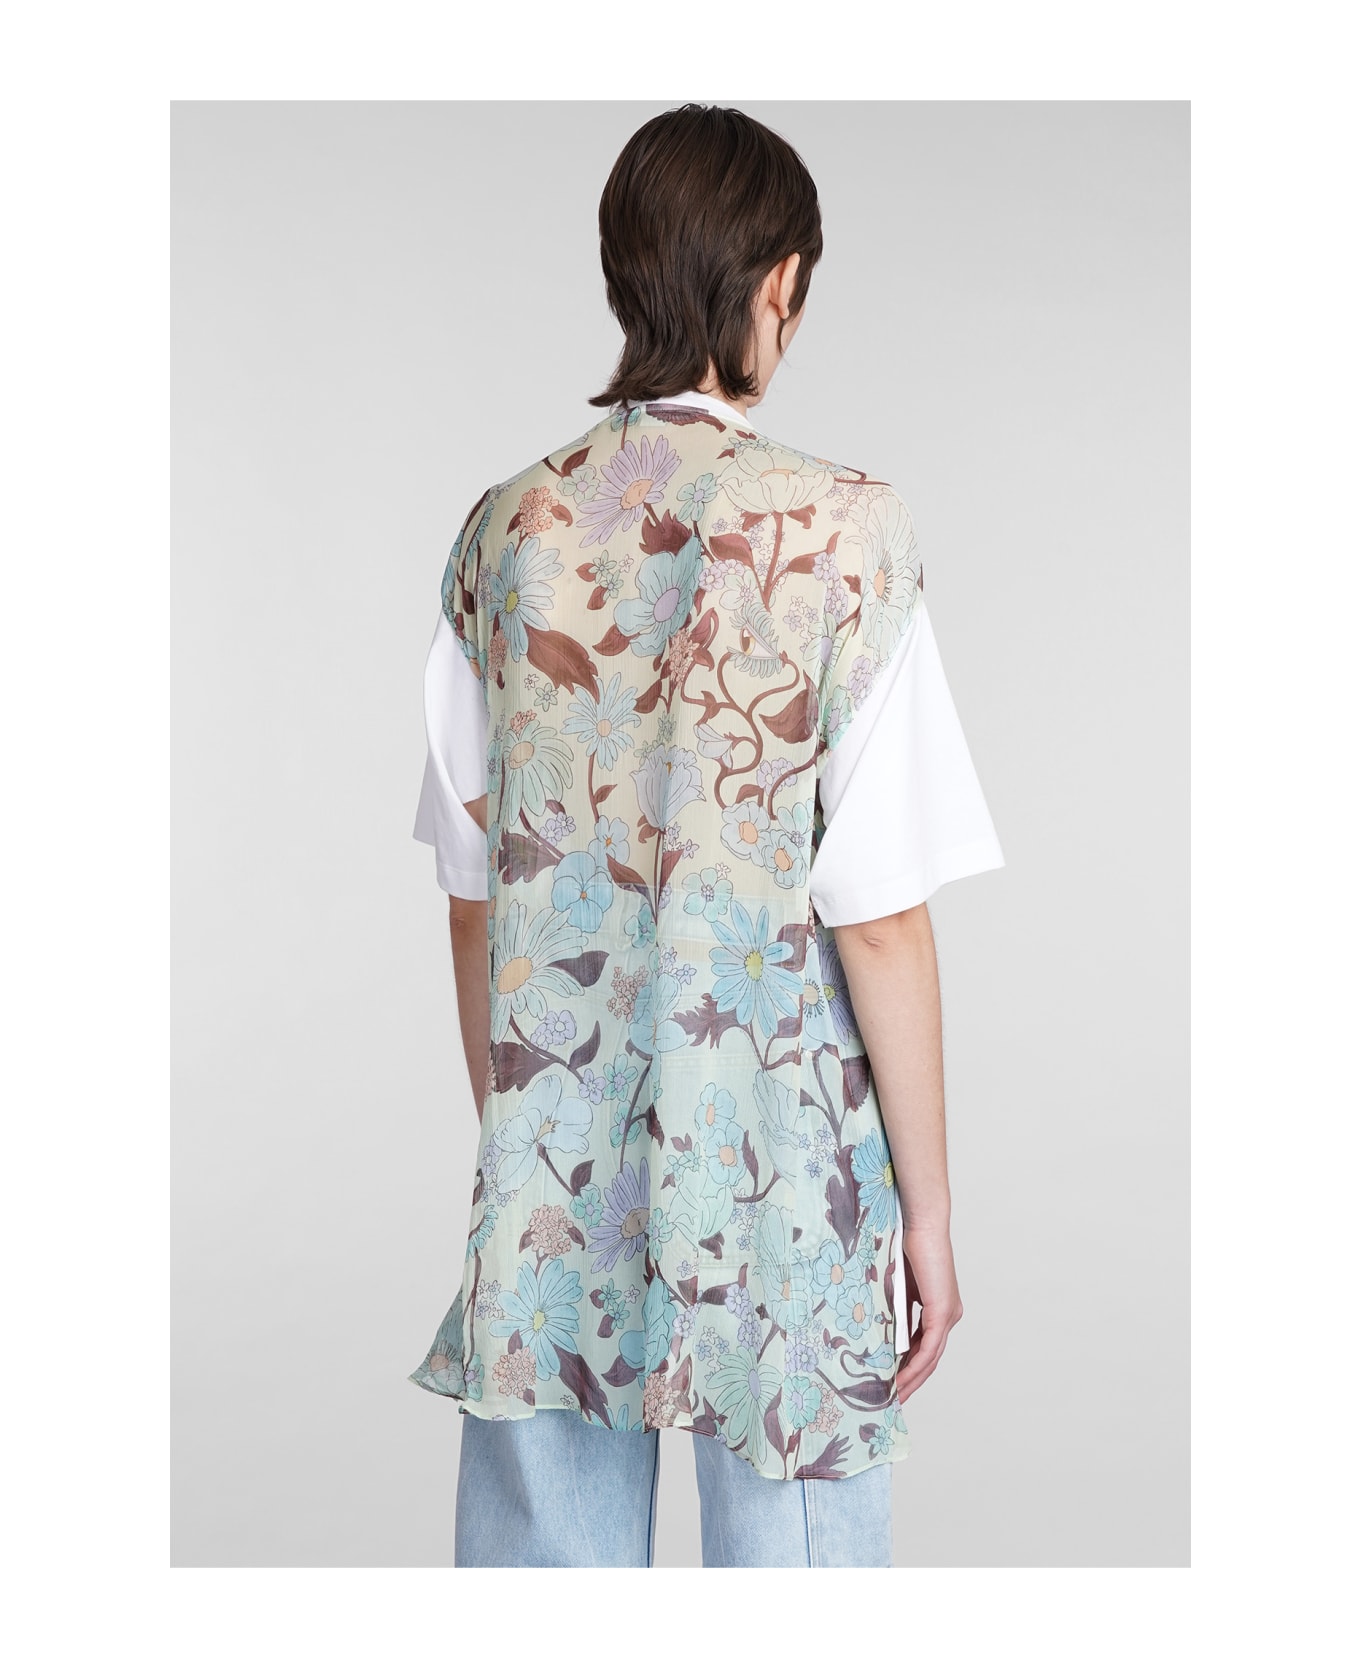 Stella McCartney Floral Printed Panelled T-shirt - white Tシャツ